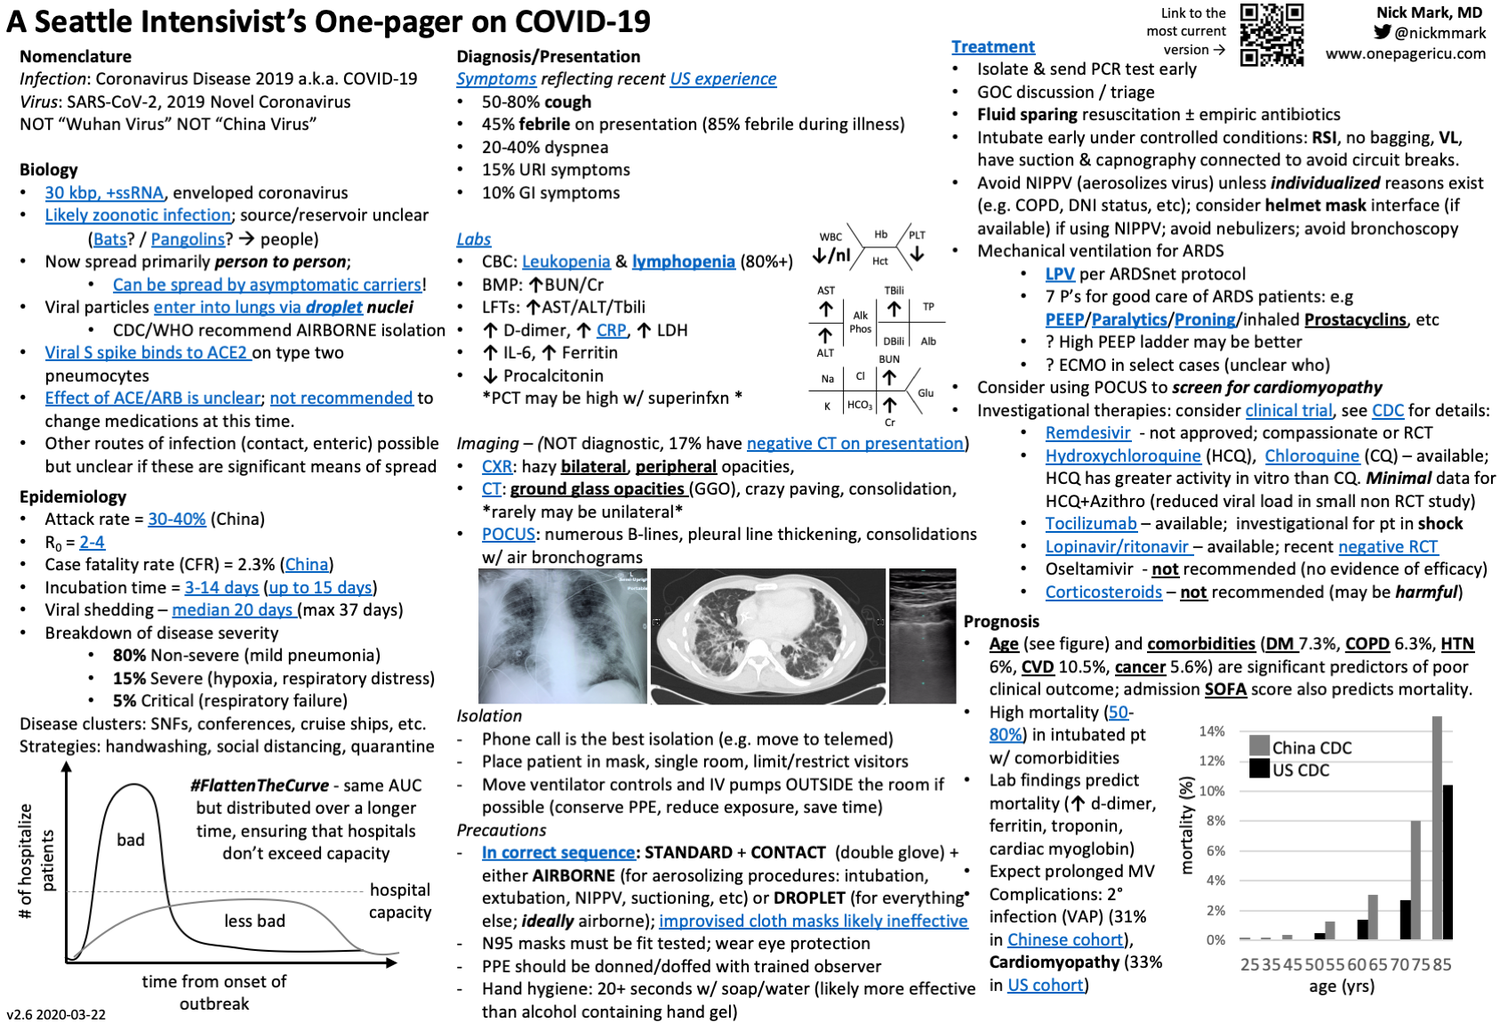 ICU_one_pager_COVID_v2.6.png?format=1500w